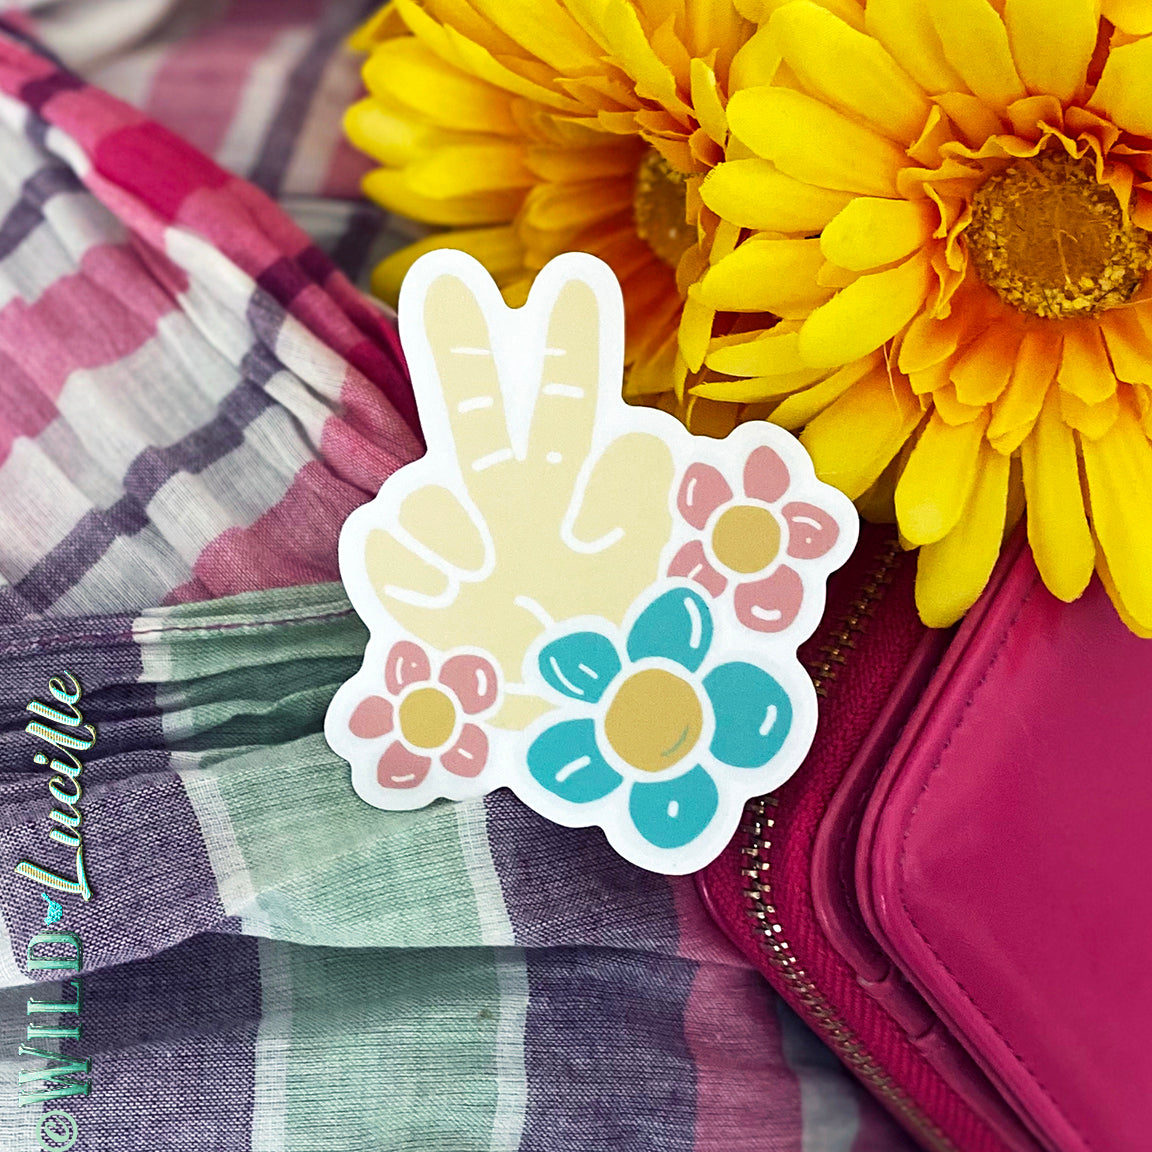 Peace Sign Hand and Daisies - Retro Vinyl Sticker Decals